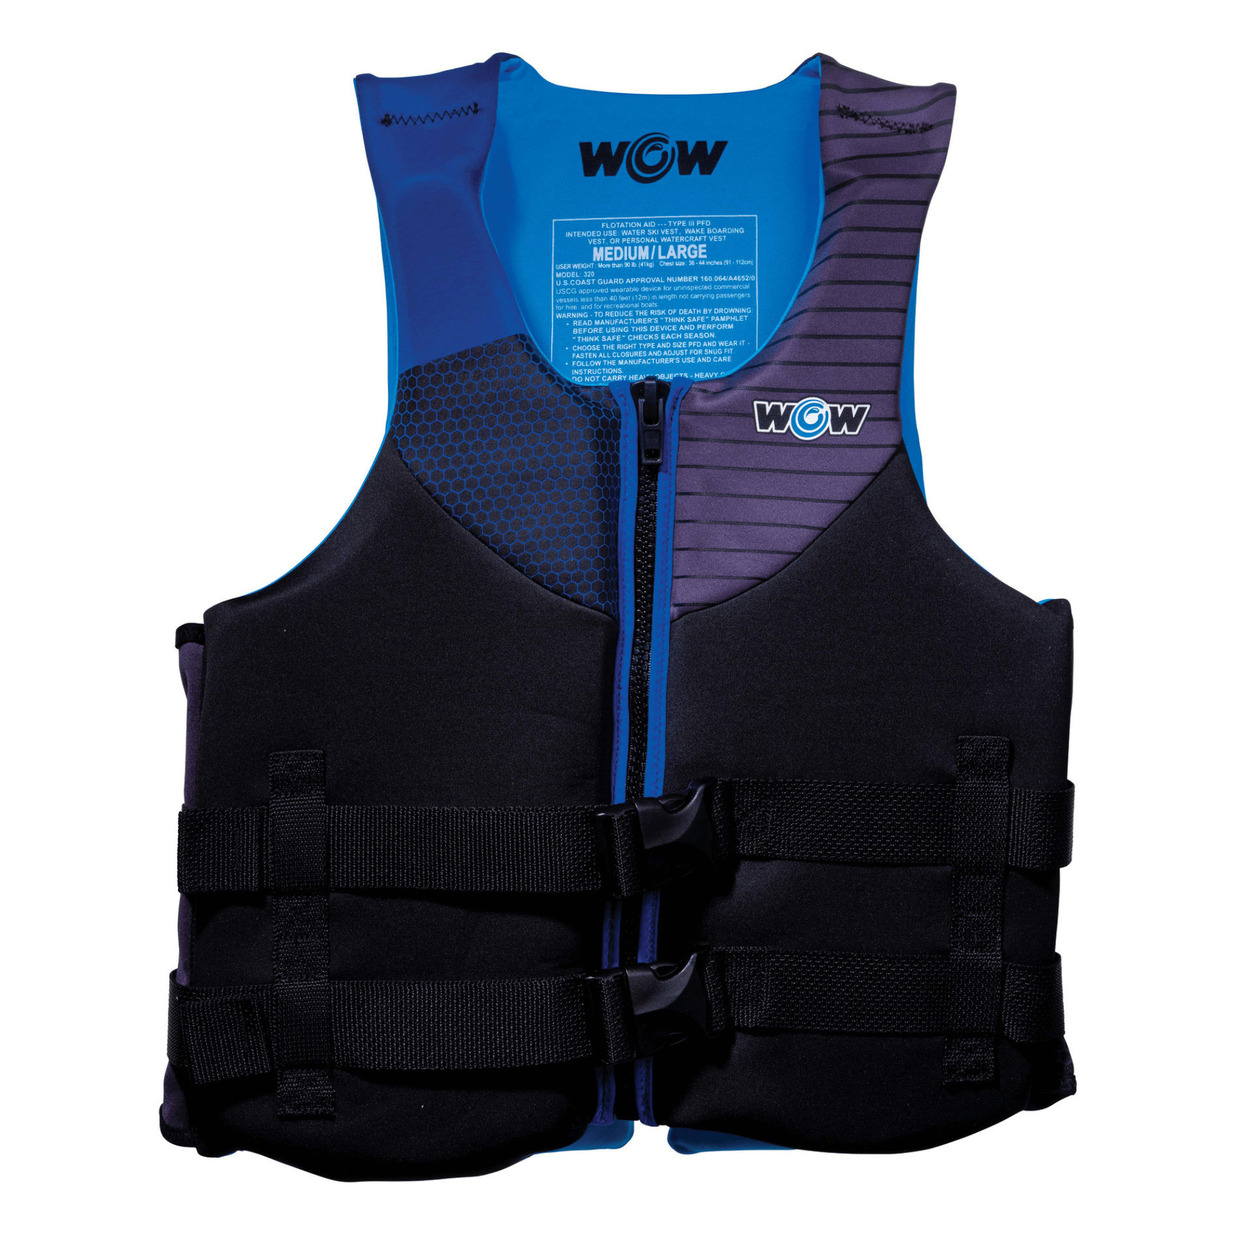 WOW Sports Feel Good Dual Sized Evoprene PFD Personal Floatation Device For Adults - Blue, Medium / Large